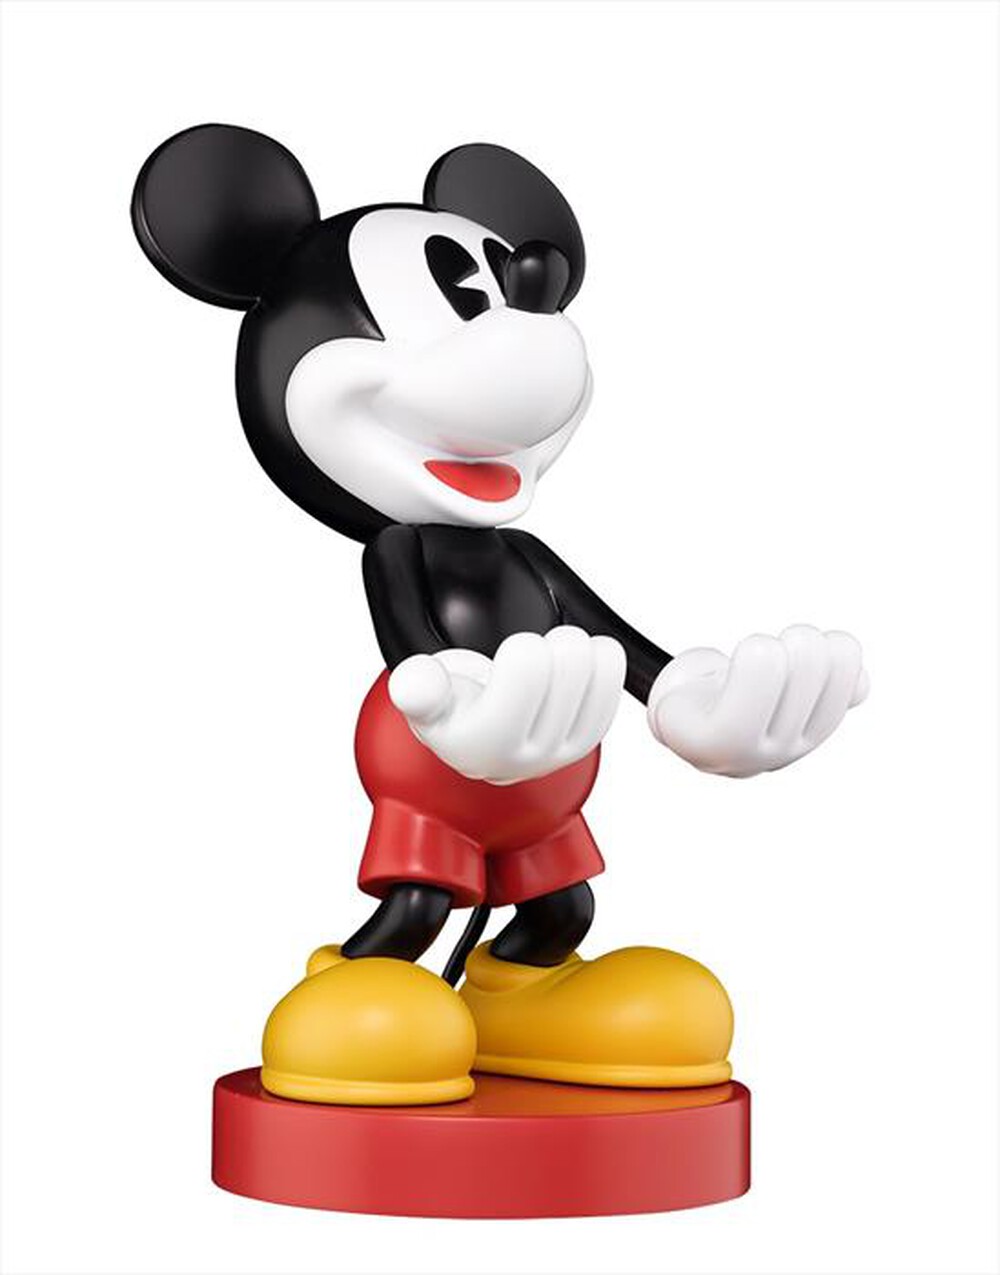 "EXQUISITE GAMING - MICKEY MOUSE CABLE GUY"